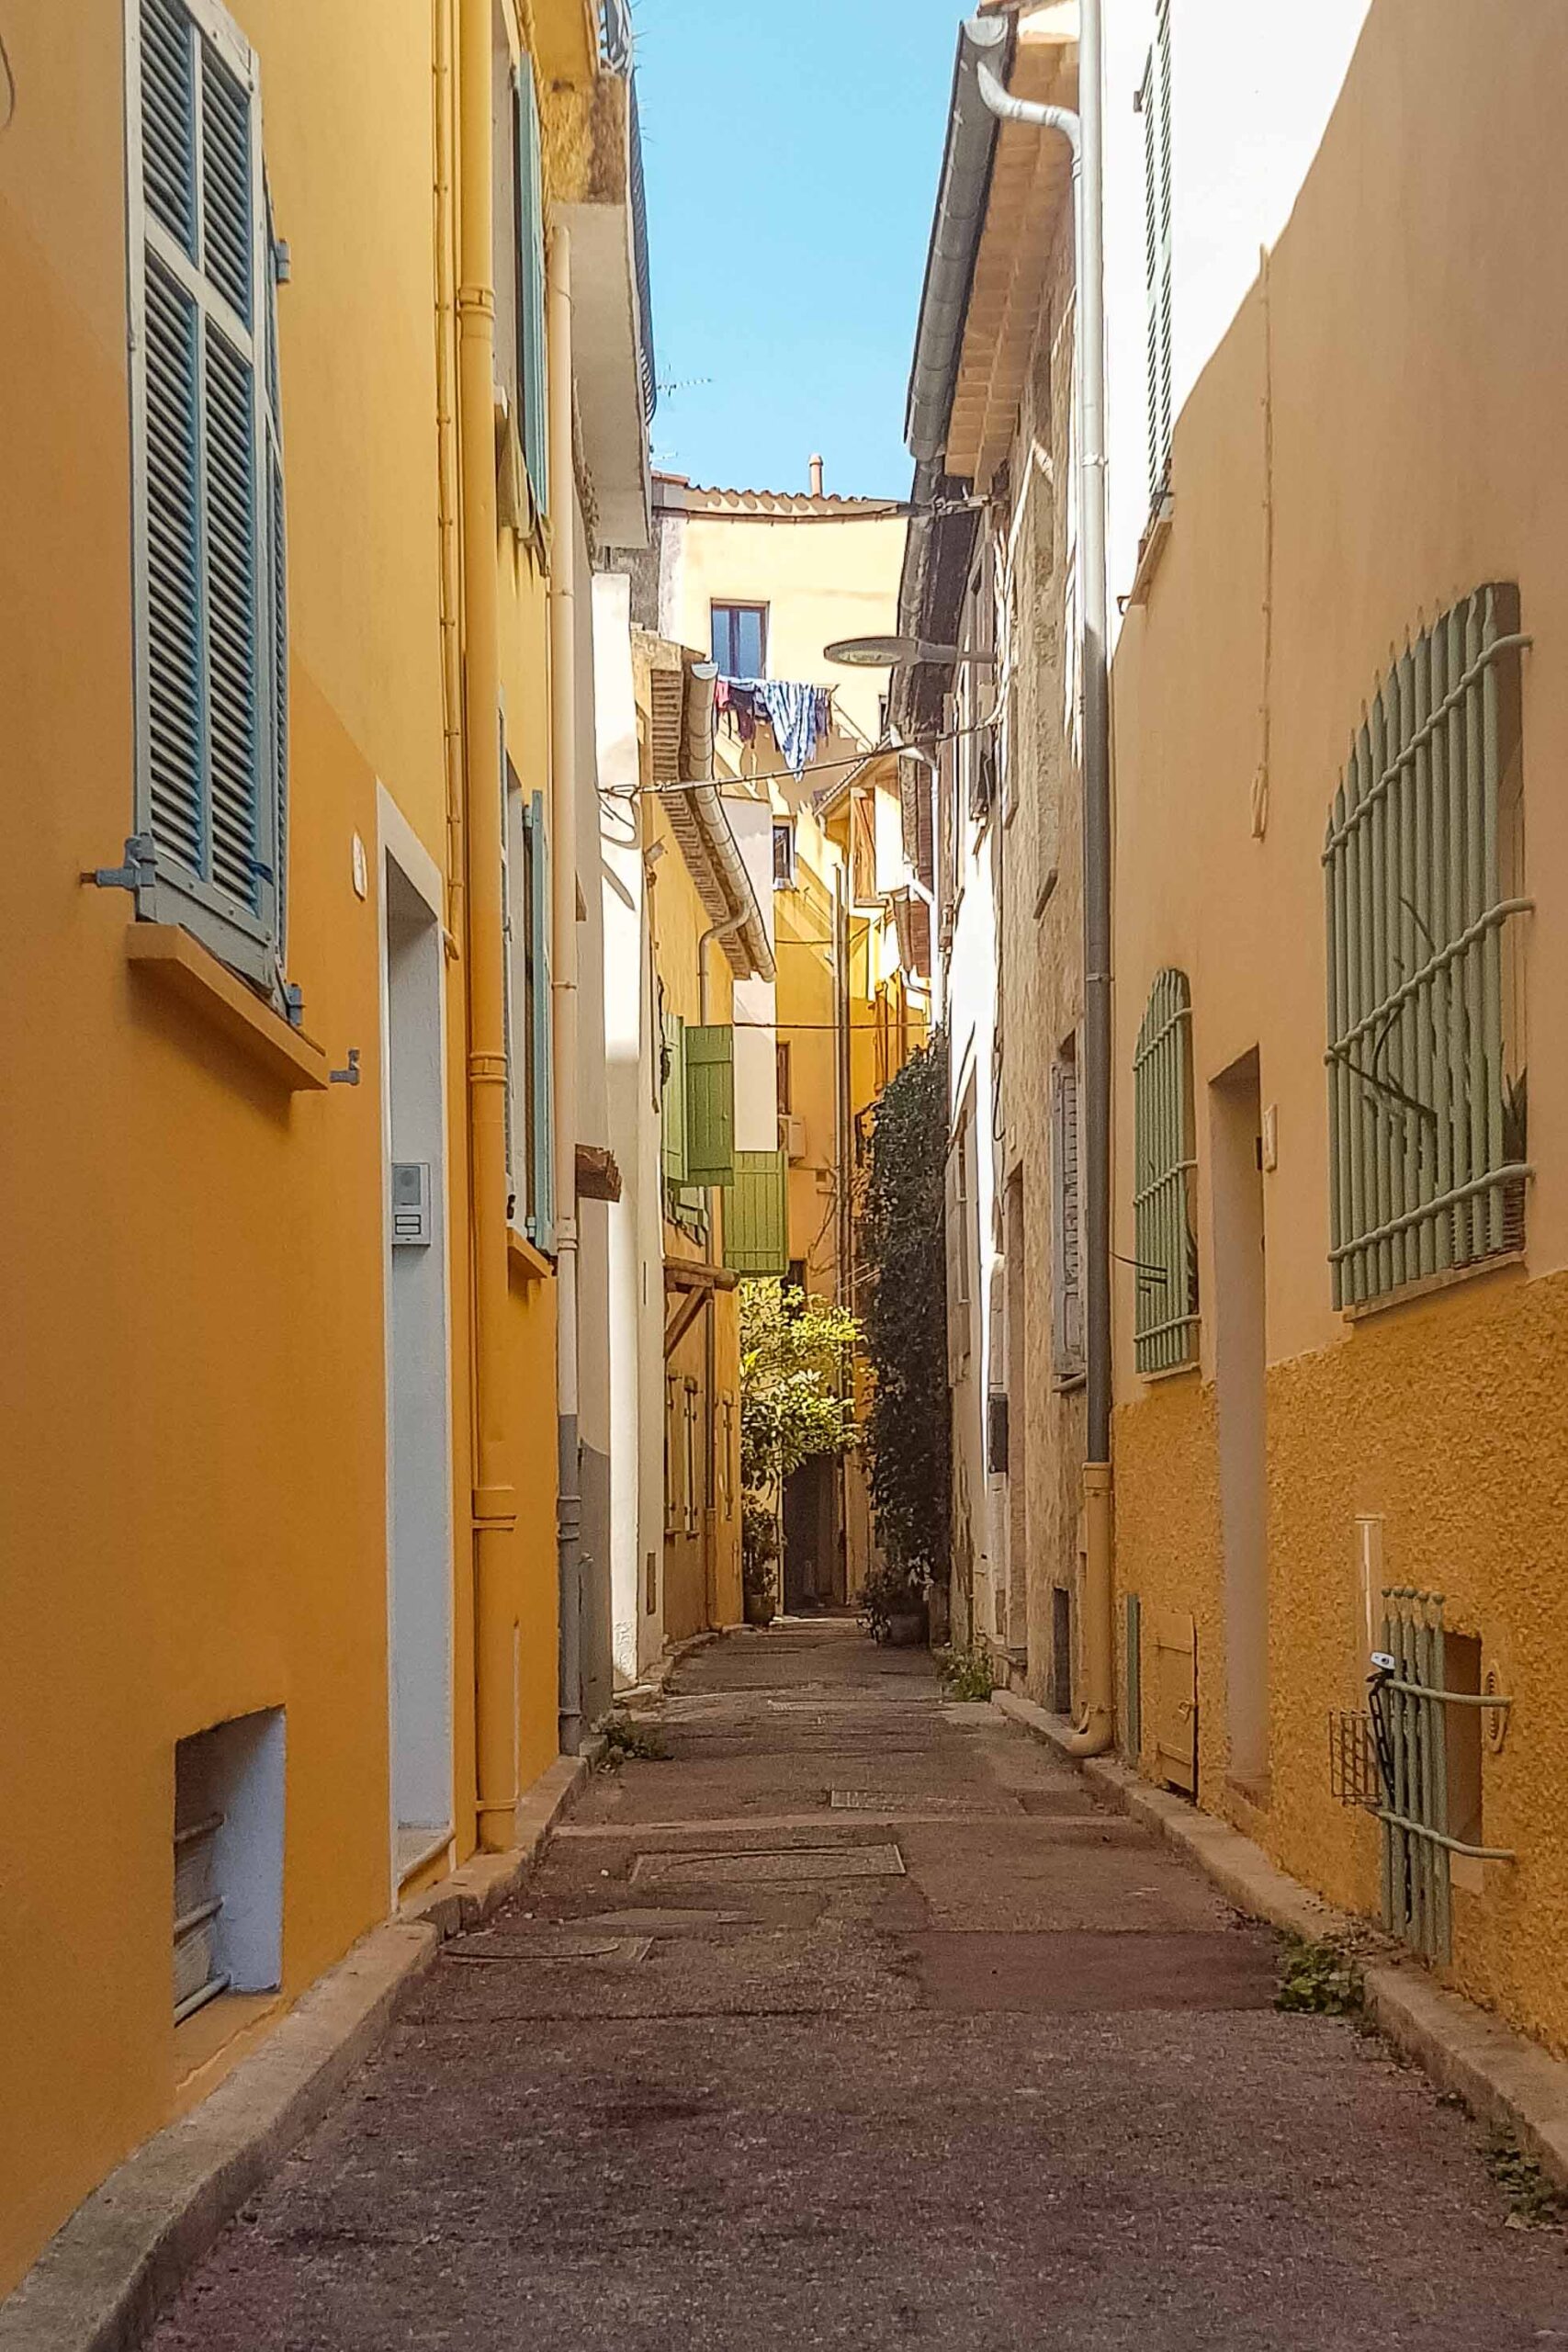 Small colourful street in the Old Town of Antibes, France